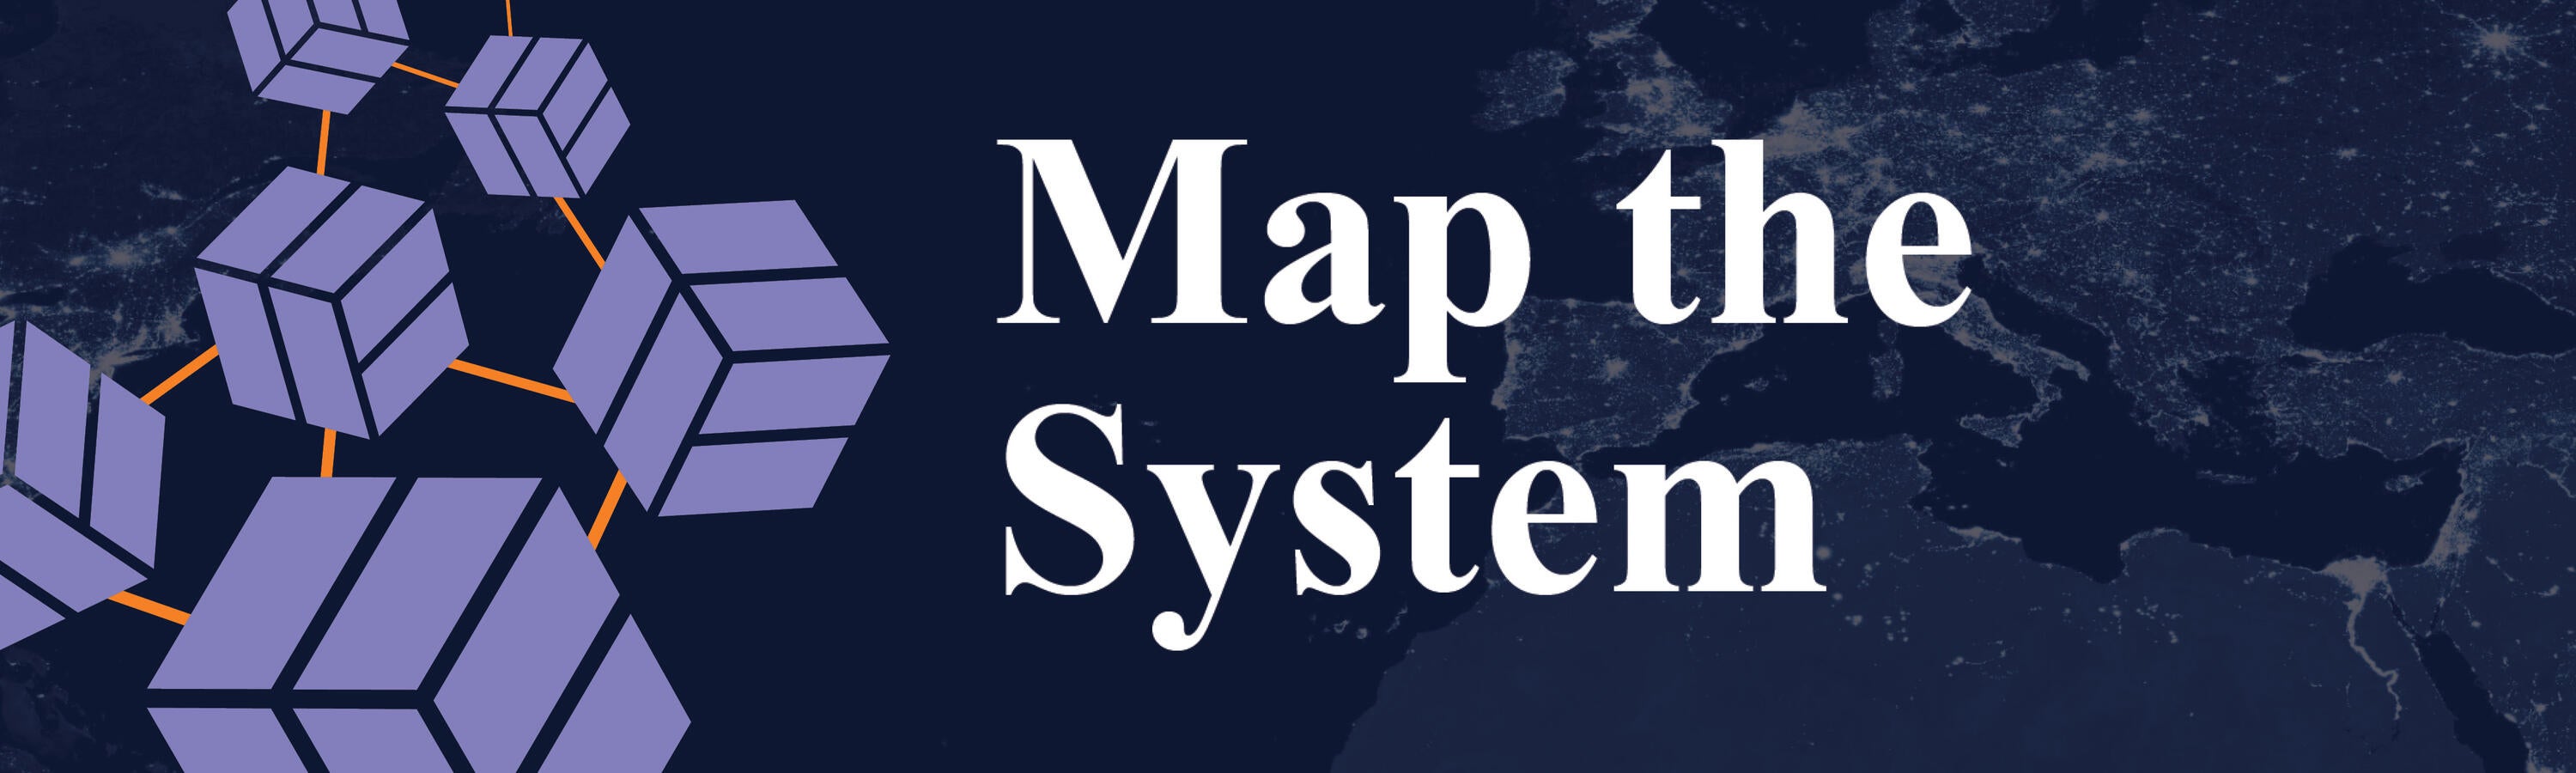 Map the System Banner